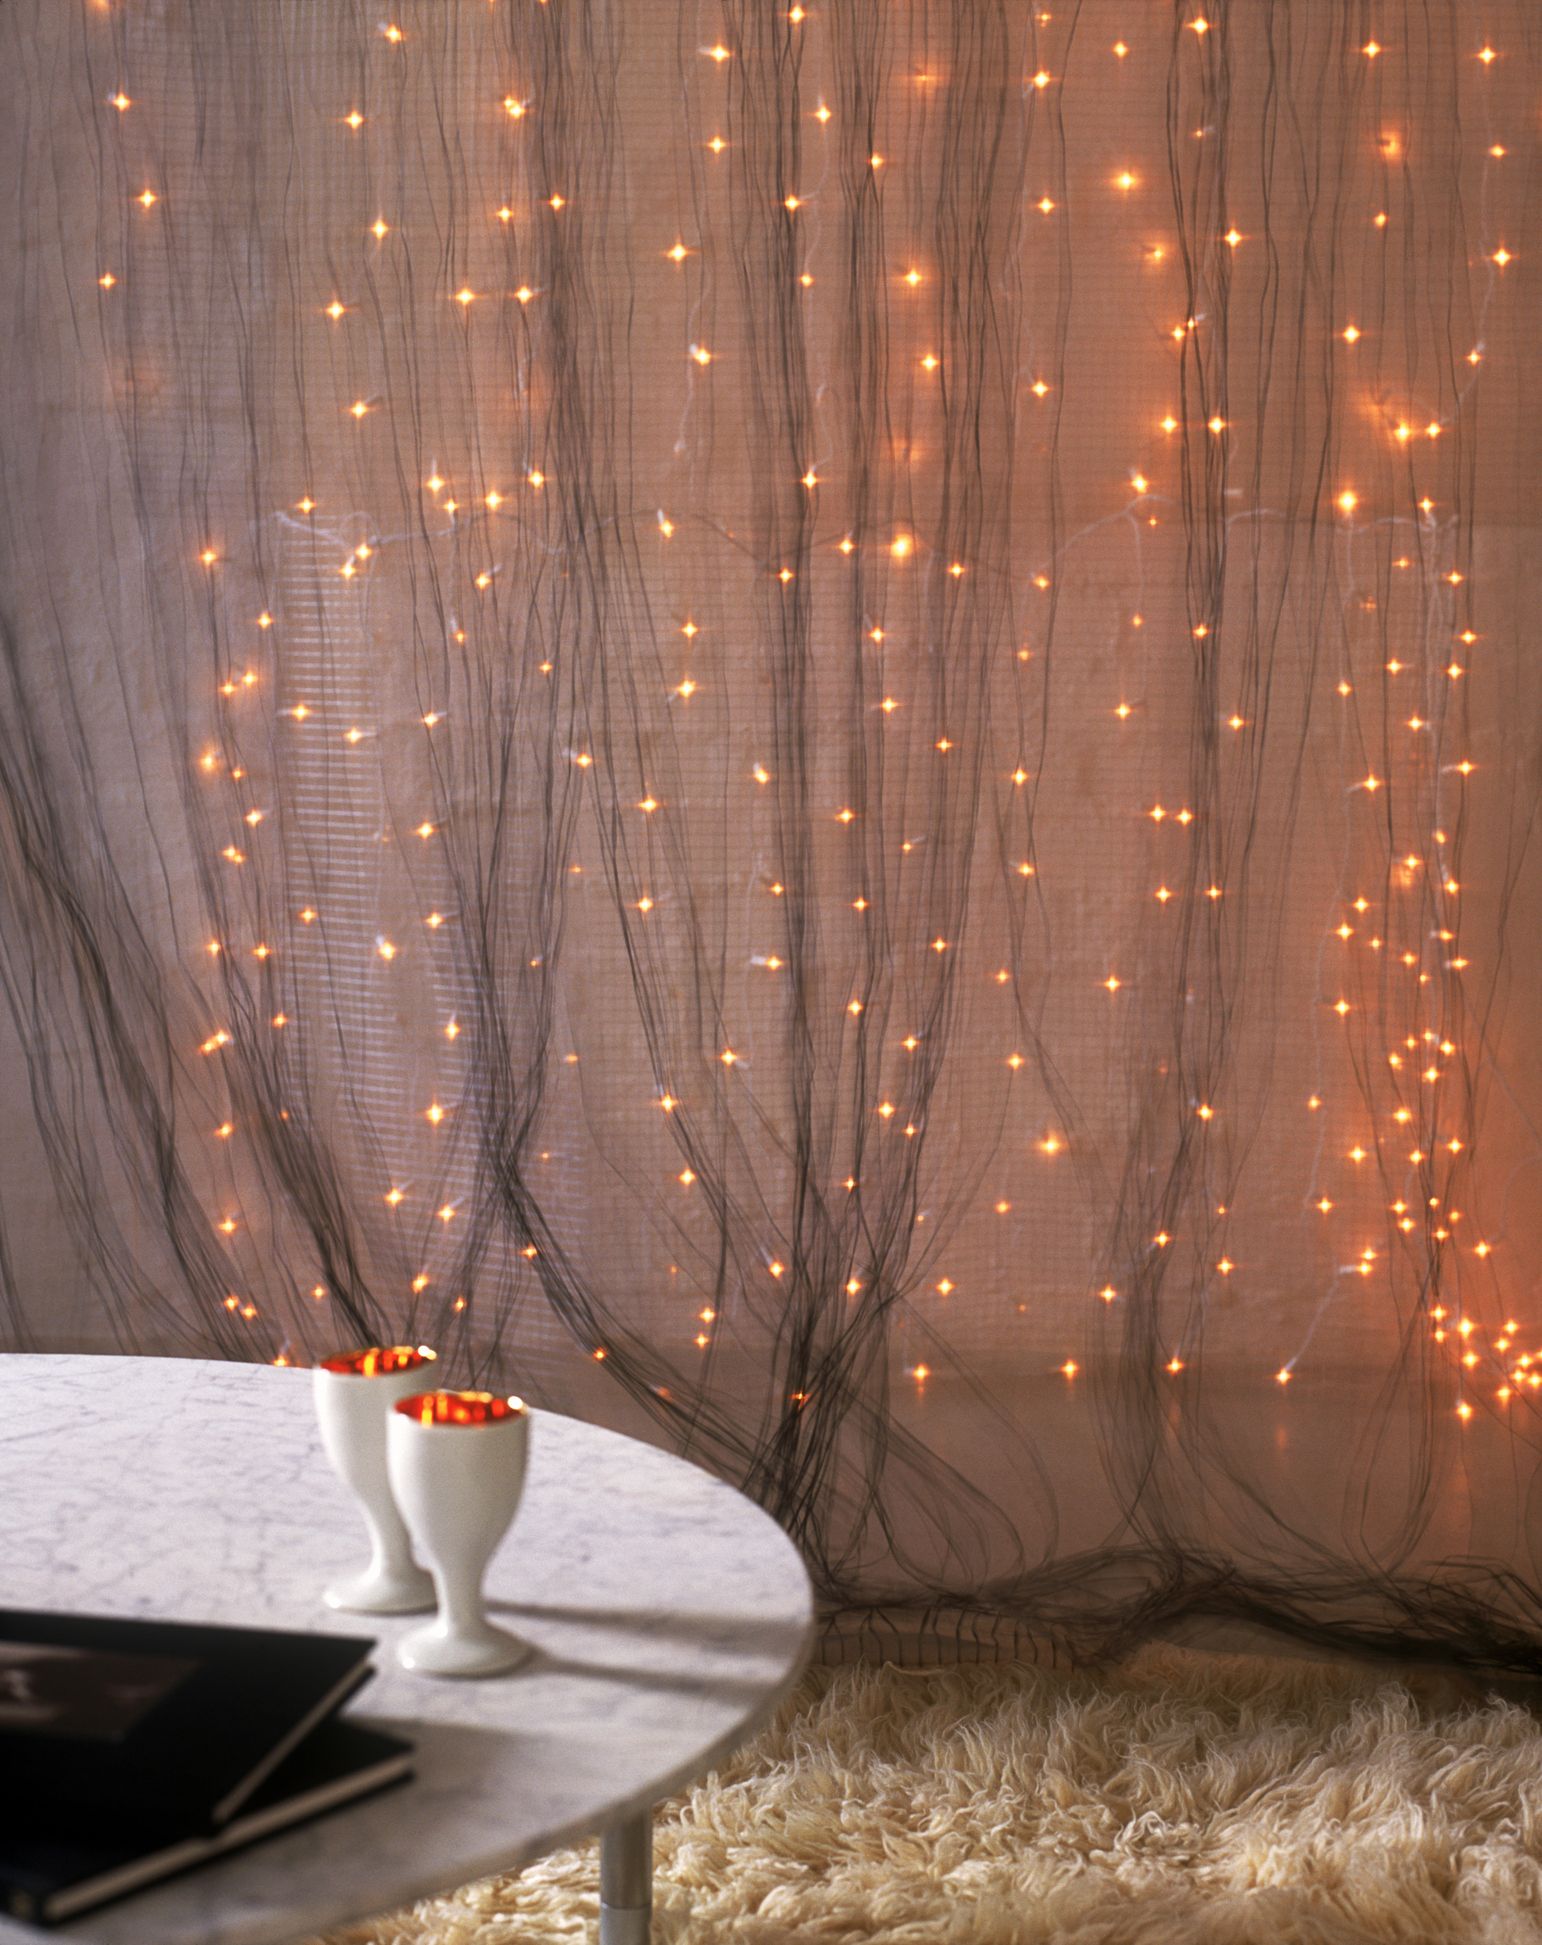 Best Christmas Light Ideas For Small Spaces How To Decorate With Christmas Lights